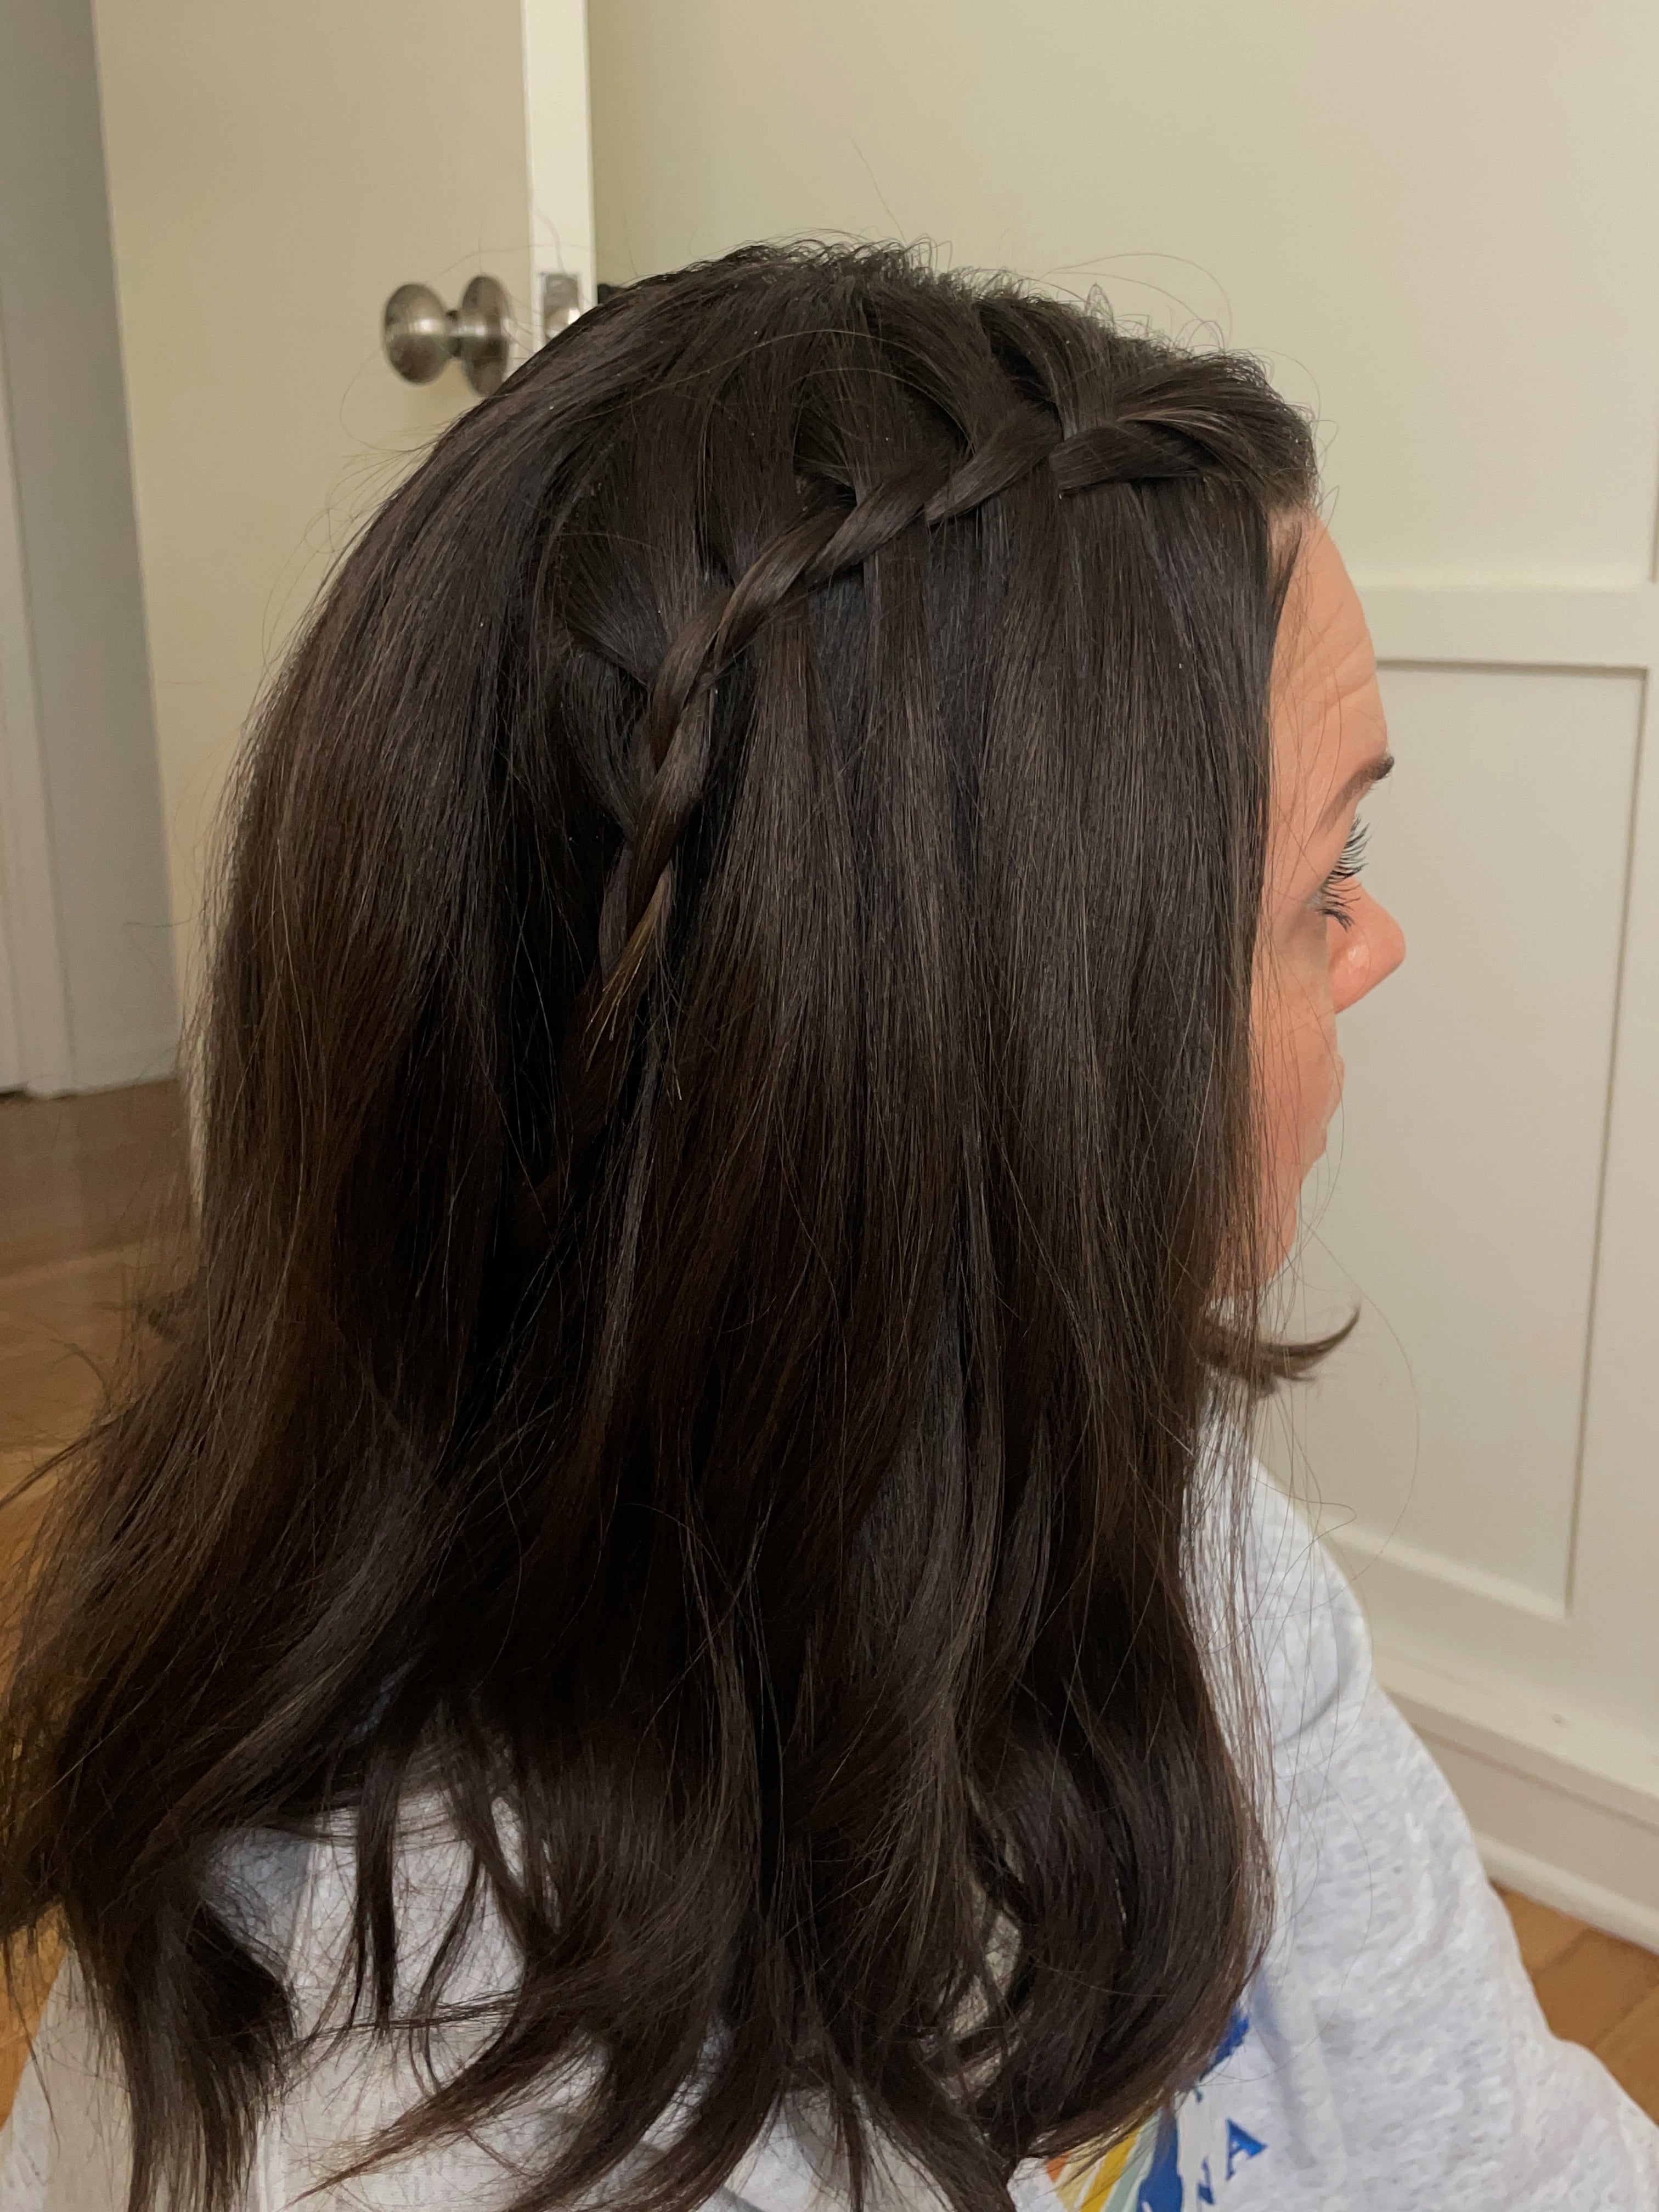 The Pony Braid Is TikTok's Summer Hairstyle of Choice — See Photos